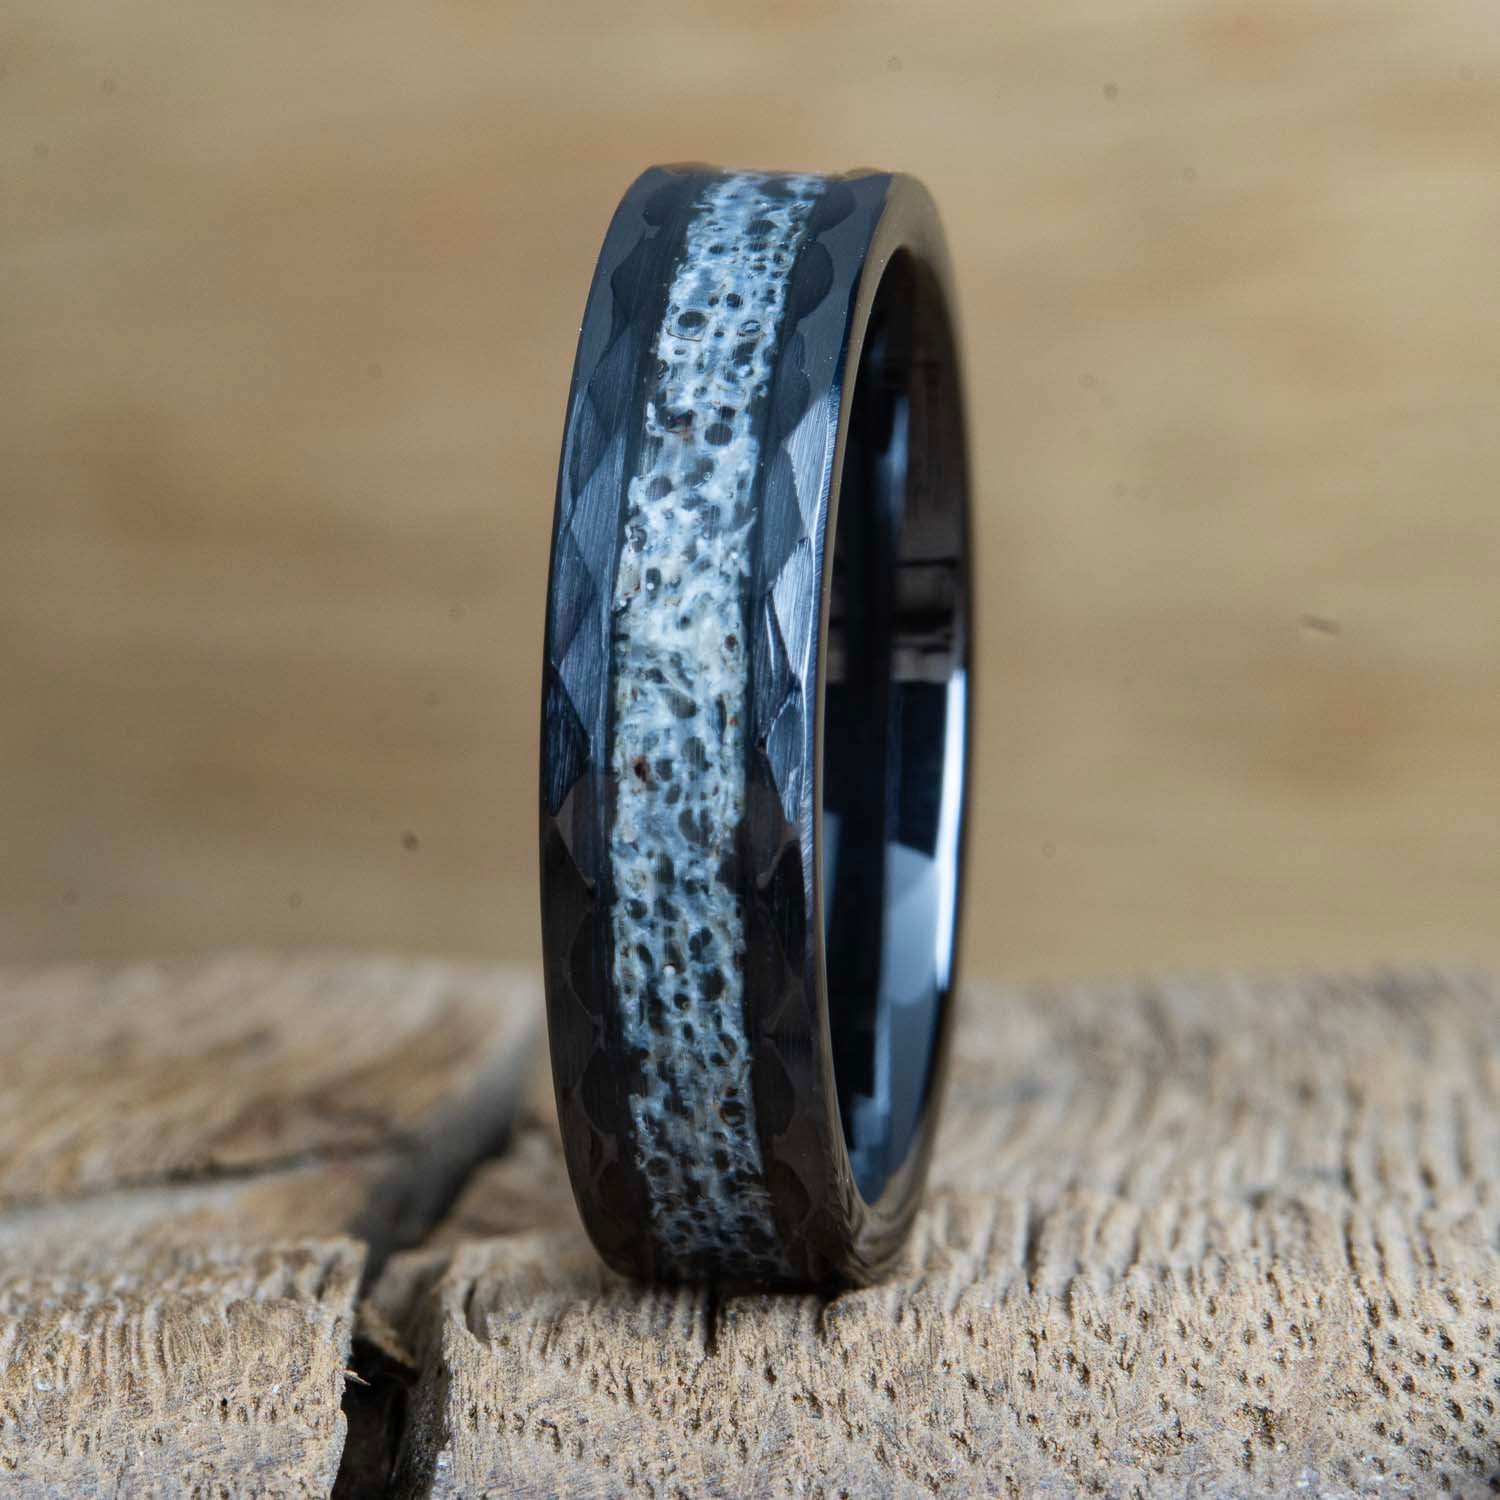 Black hammered wedding band with Antler inlay